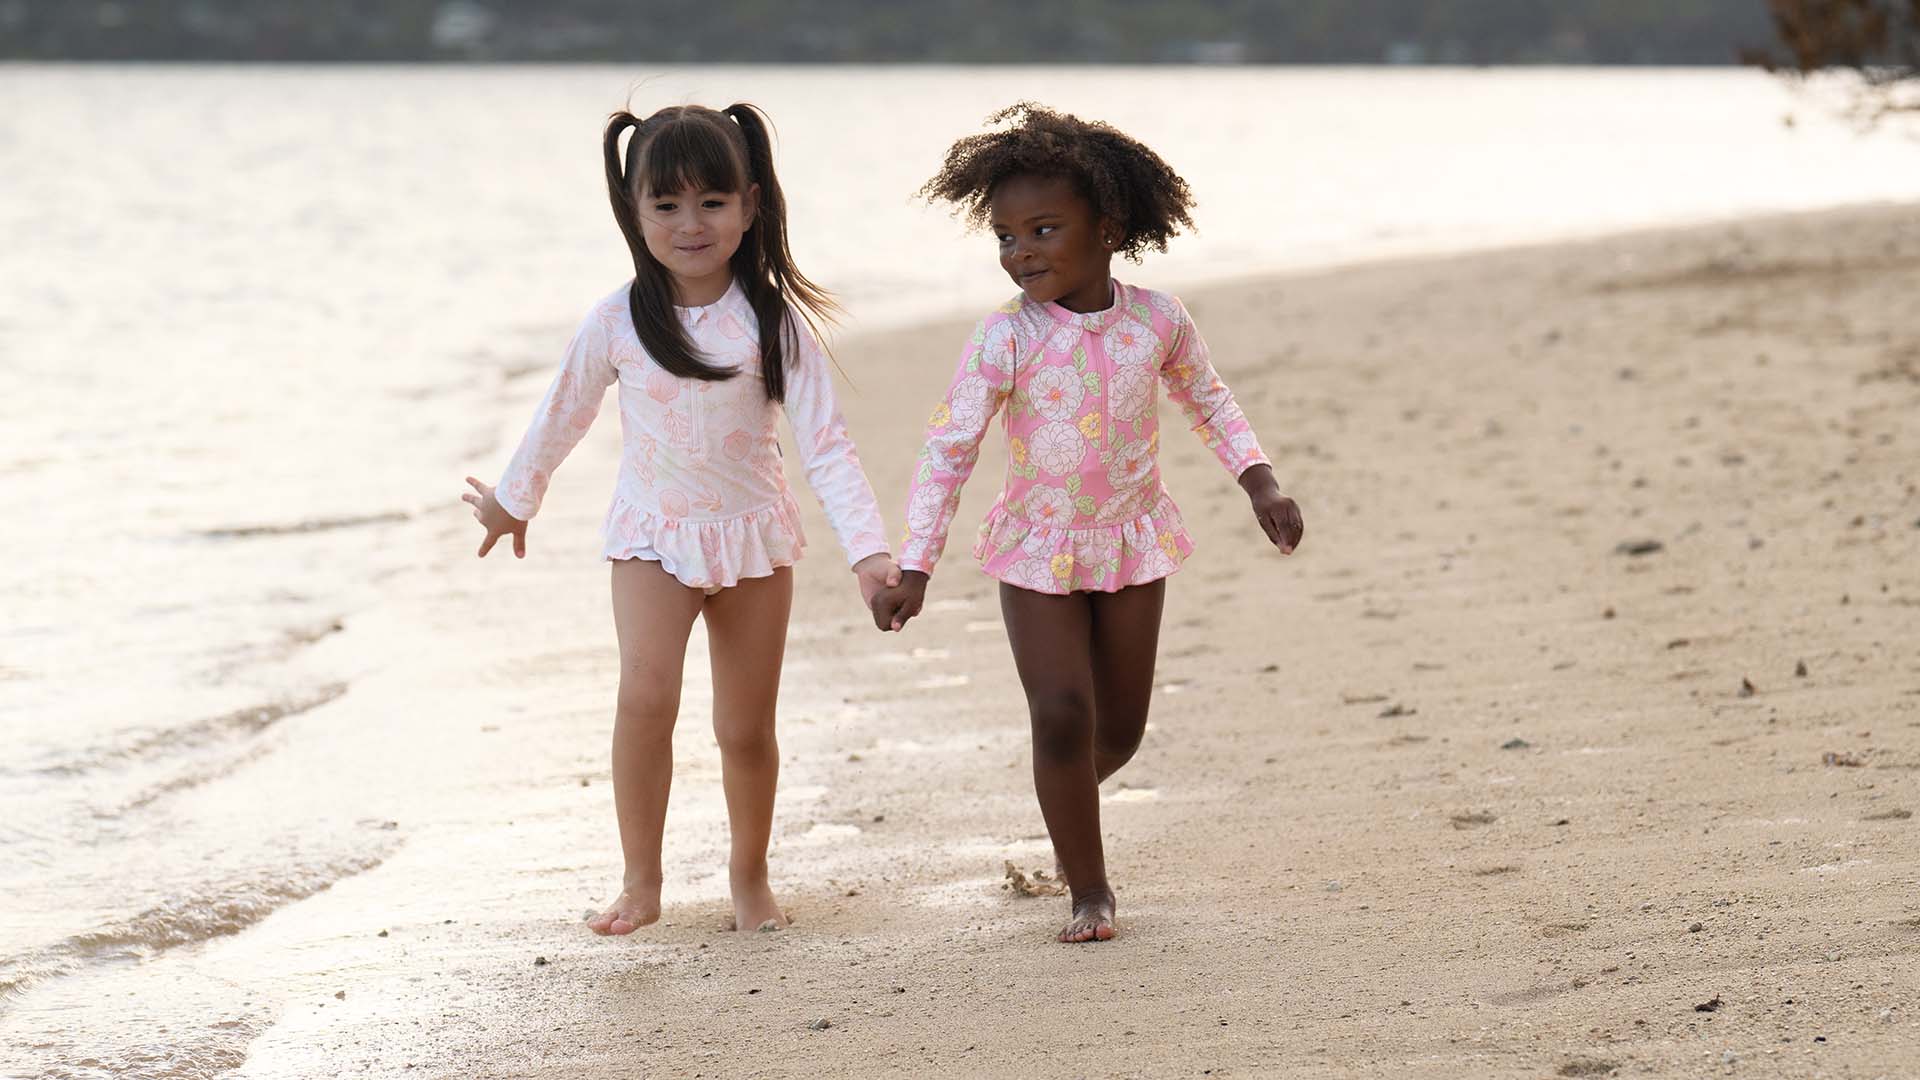 Two young girls in cute pink swimsuits holding hands and walking along a sandy beach in matching floral swimsuits.